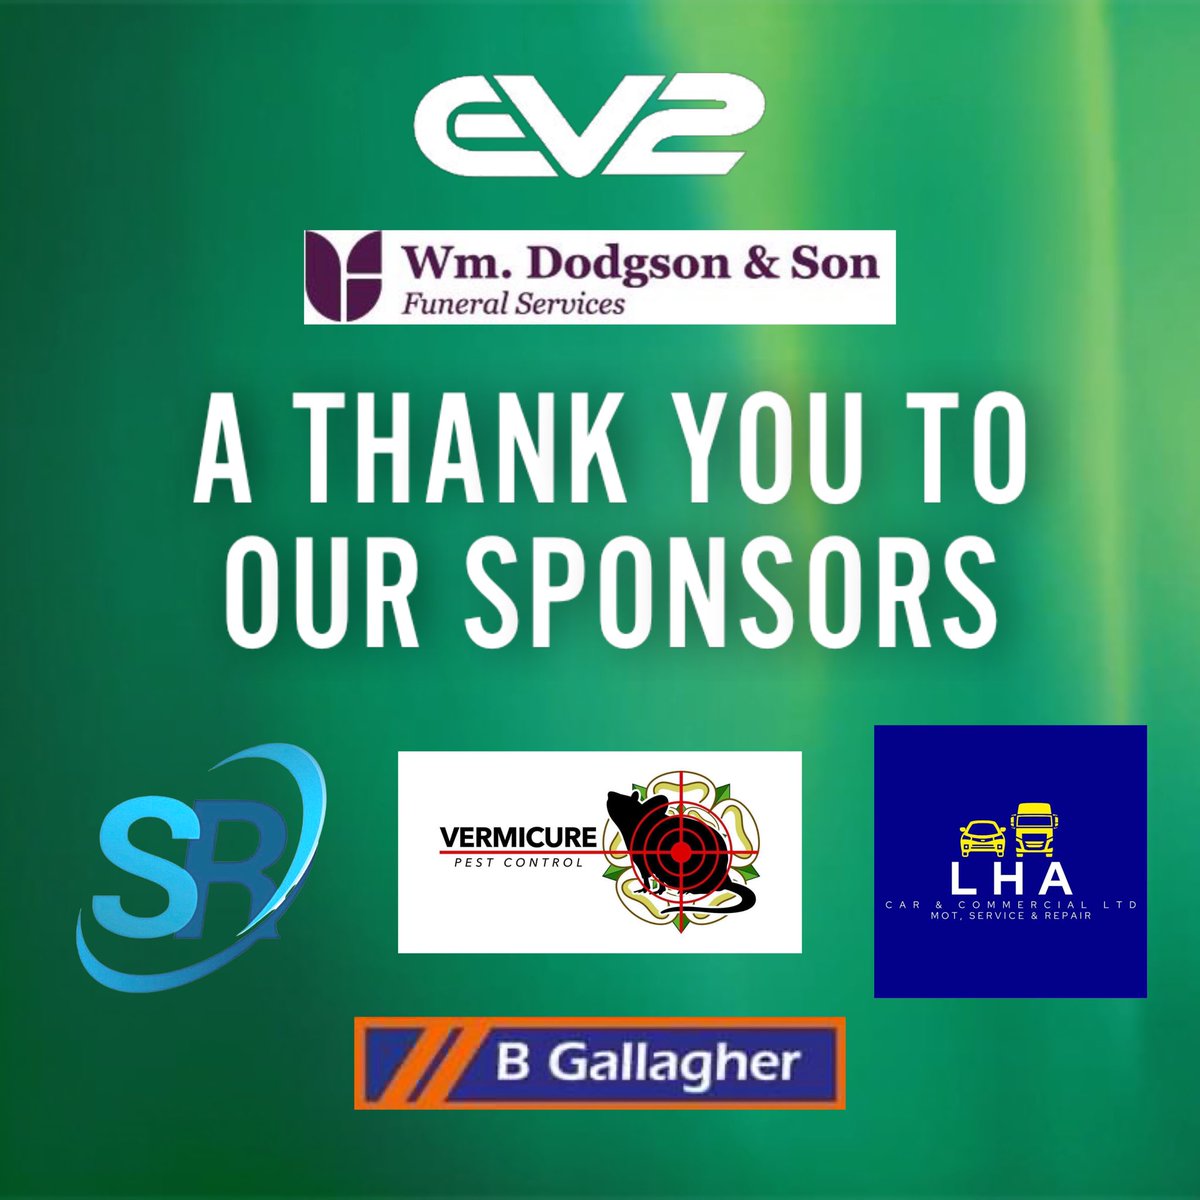 We would like to say a huge thank you to our loyal main sponsors, we thank them all for their continued support! S&R Electrical Contracting Services ltd L H a Car and Commercial Ltd VermiCure Pest Control bgallagherconstruction.co.uk Wm. Dodgson & Son Funeral Services @EV2Sportswear